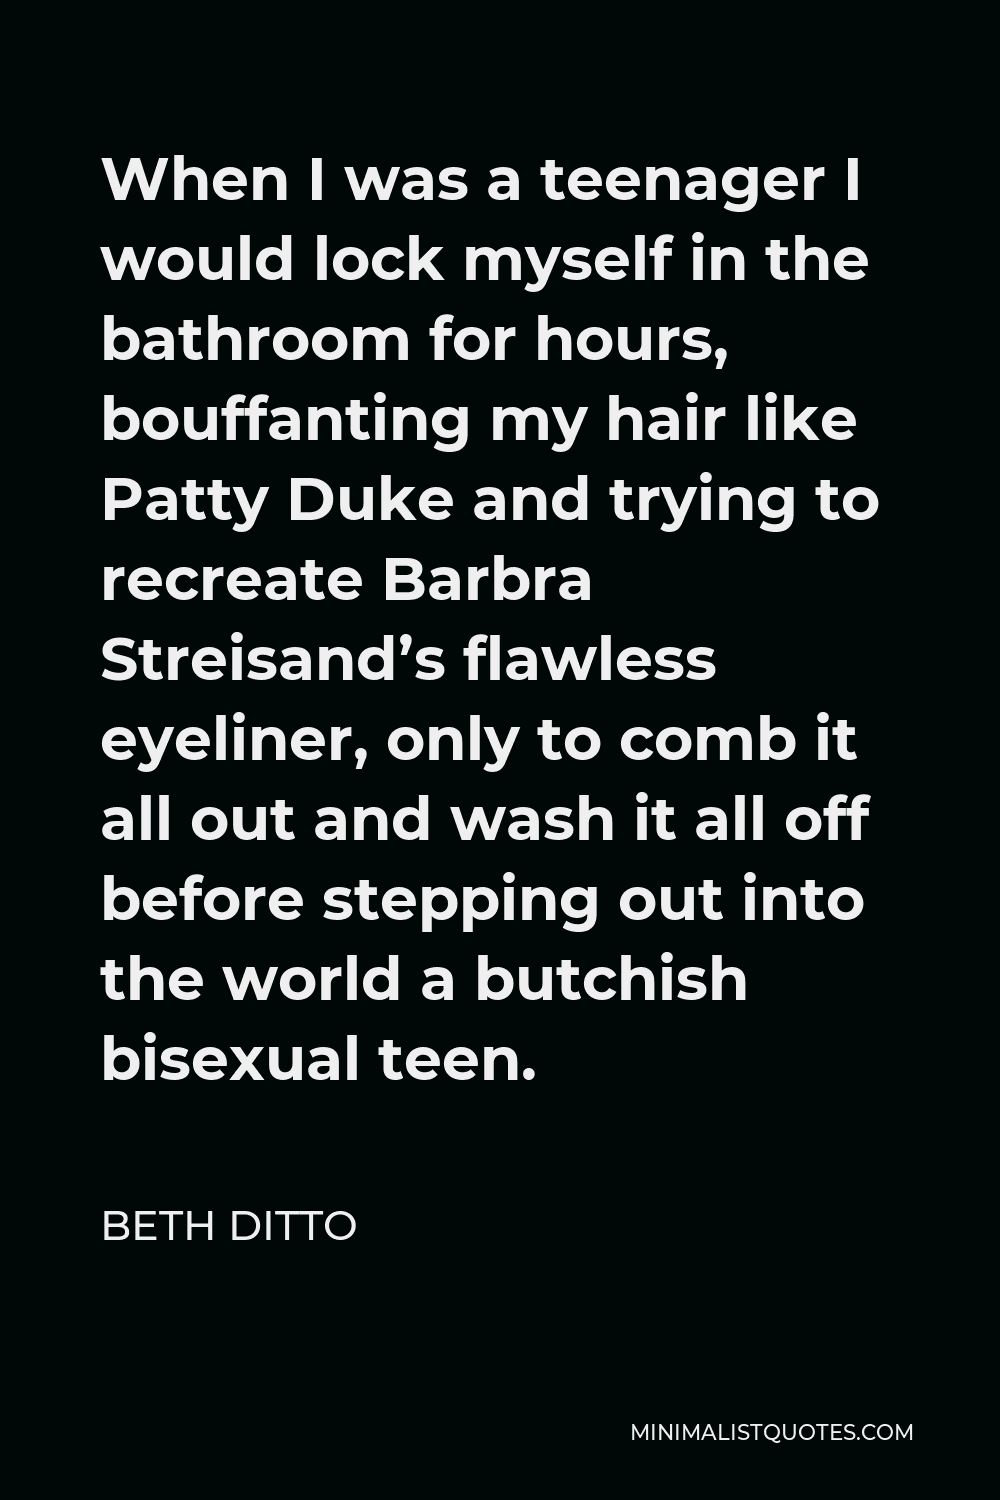 Beth Ditto Quote - When I was a teenager I would lock myself in the bathroom for hours, bouffanting my hair like Patty Duke and trying to recreate Barbra Streisand’s flawless eyeliner, only to comb it all out and wash it all off before stepping out into the world a butchish bisexual teen.